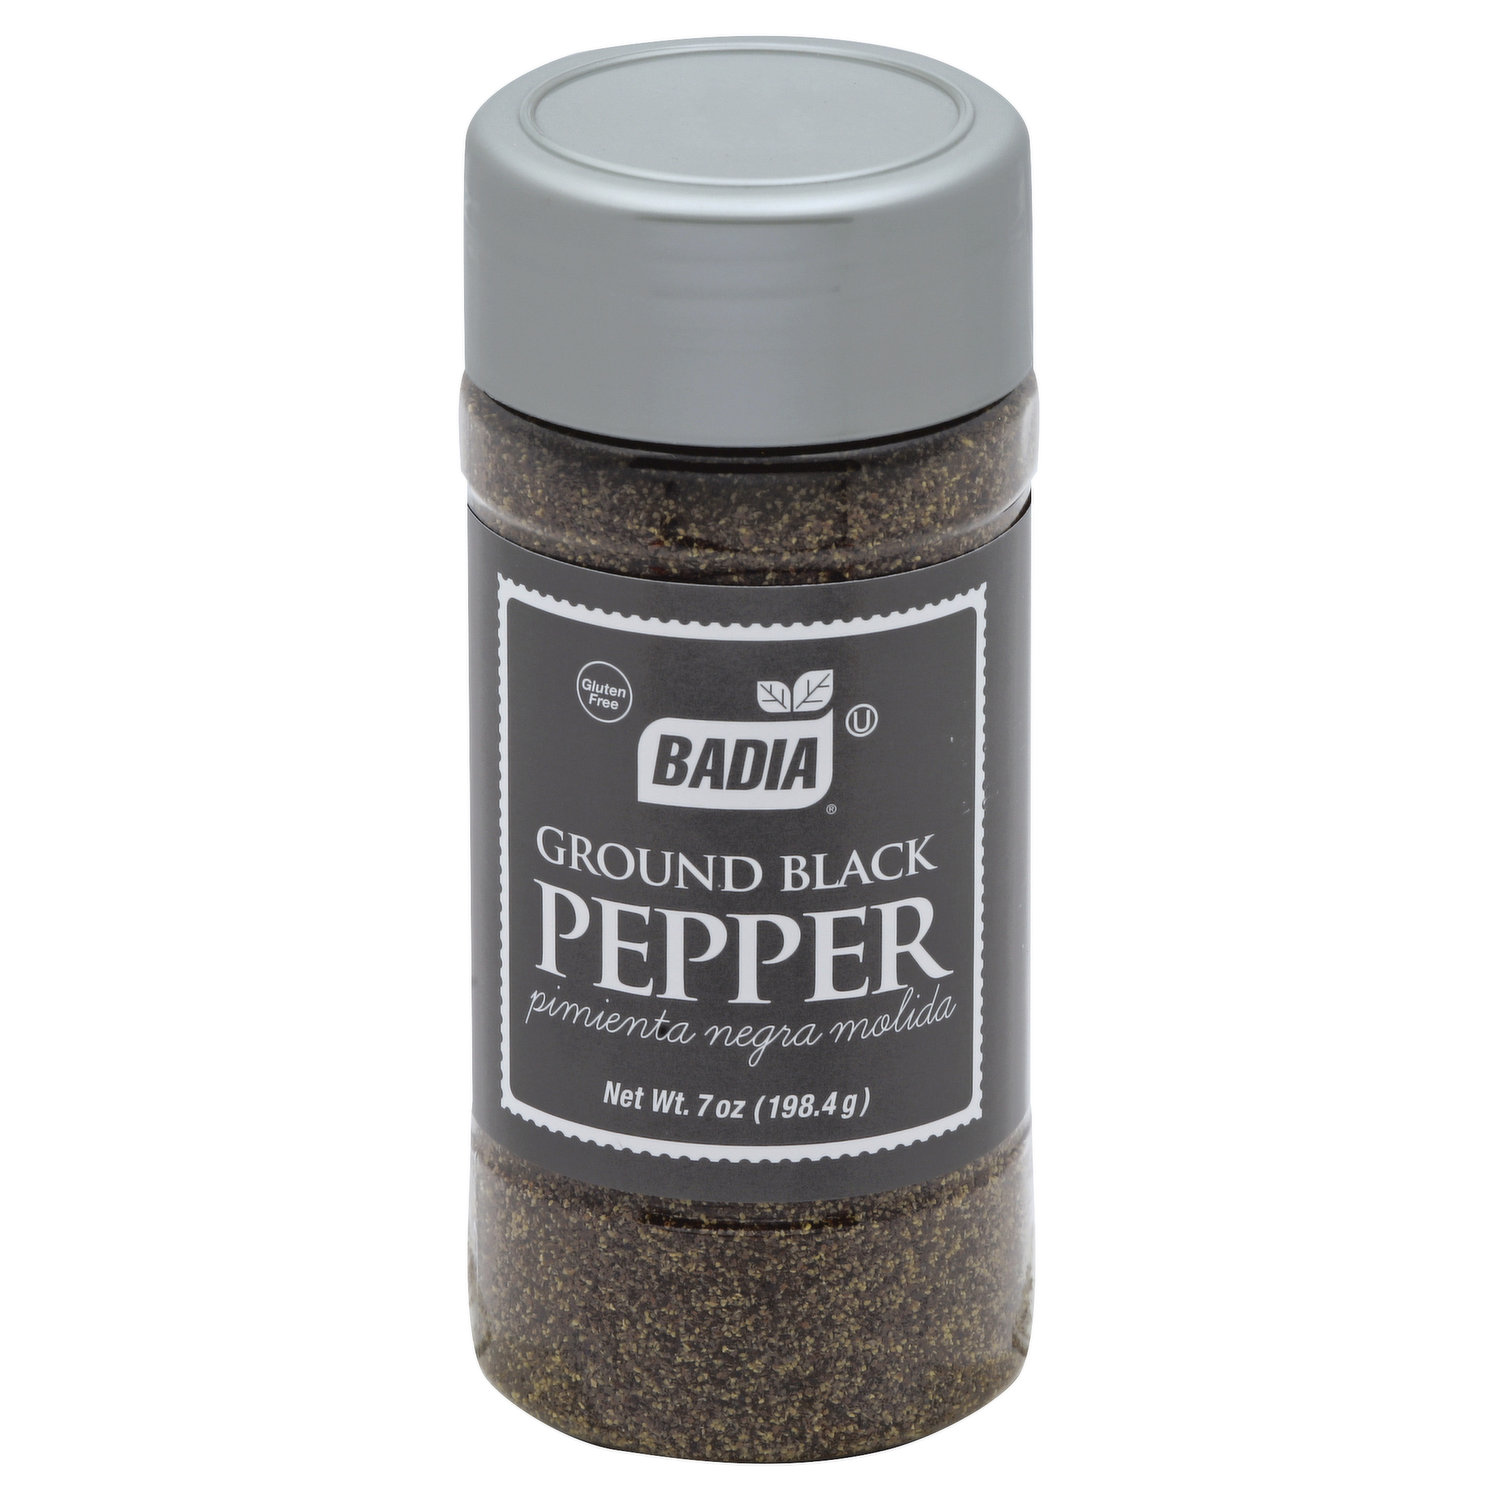 Badia Spices, Inc. - Our new Orange Pepper Seasoning Blend will be